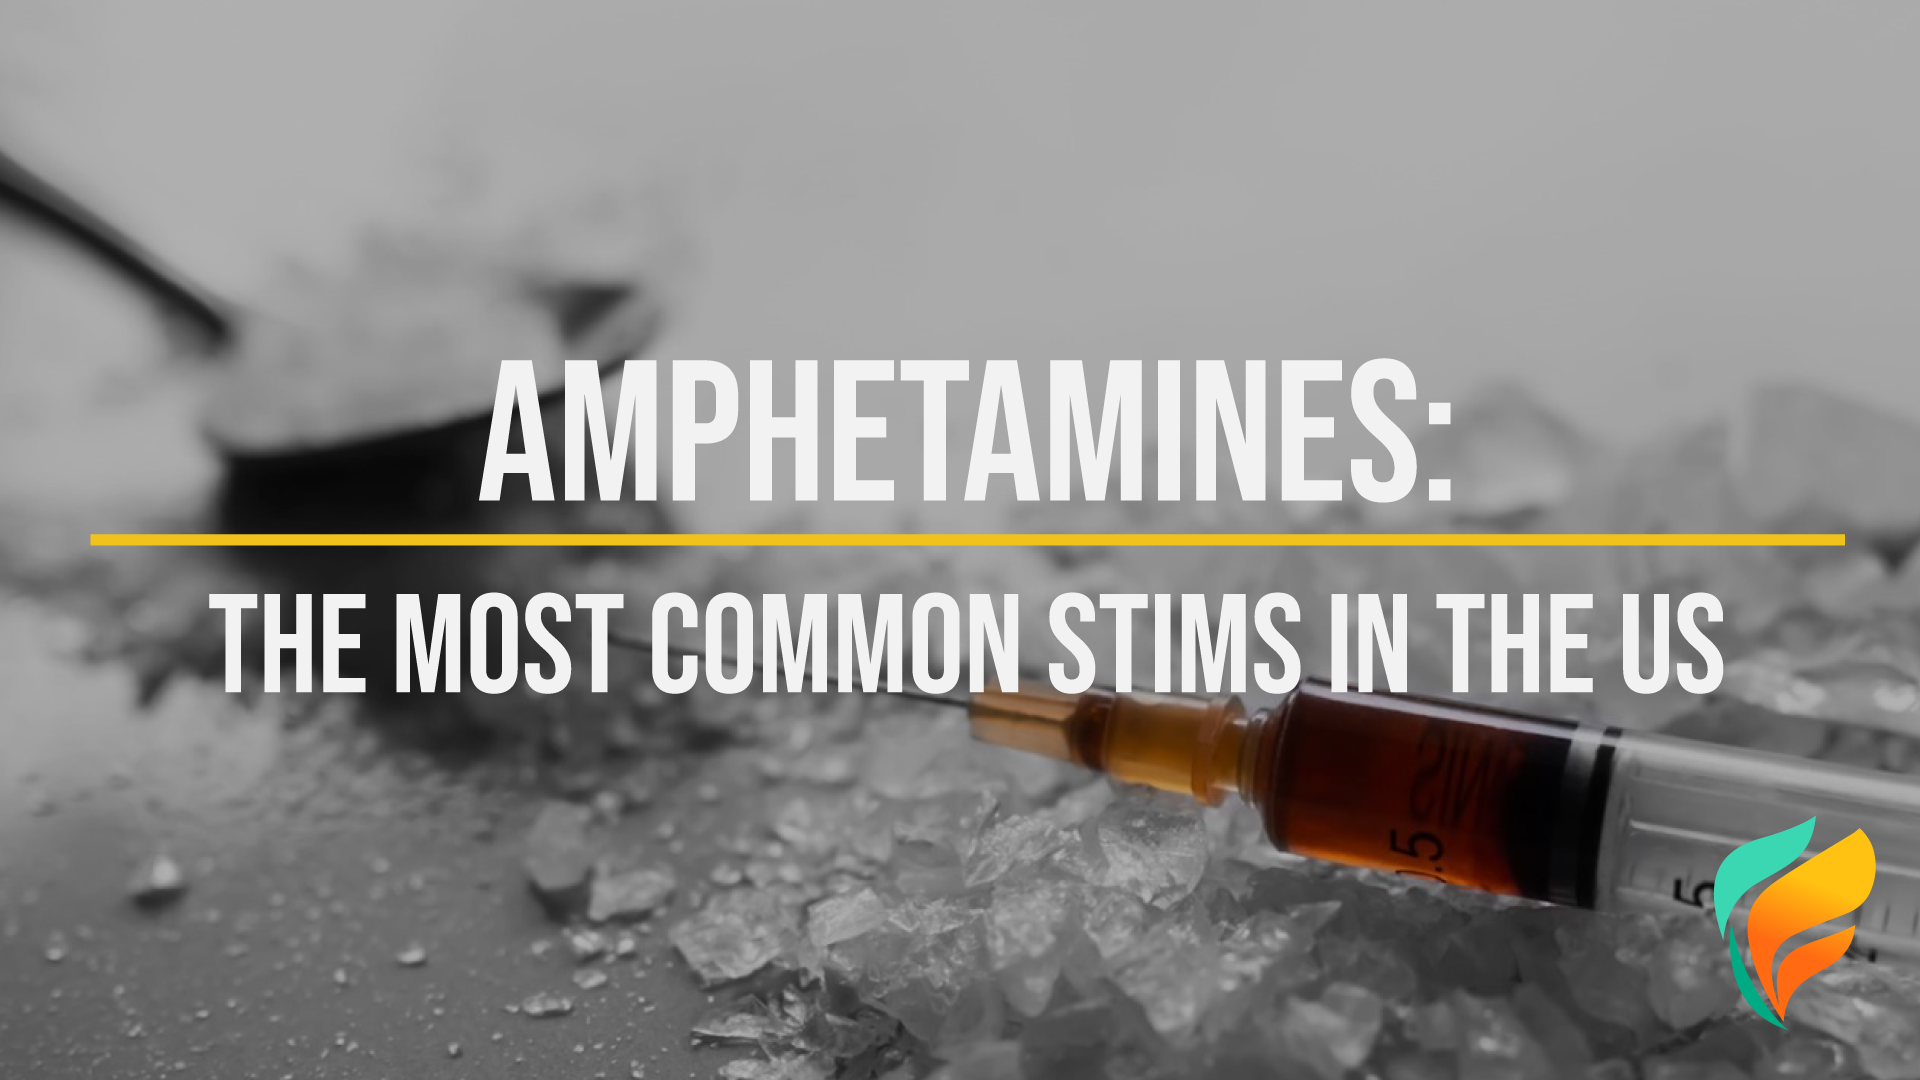 What are the most popular amphetamines in the US?